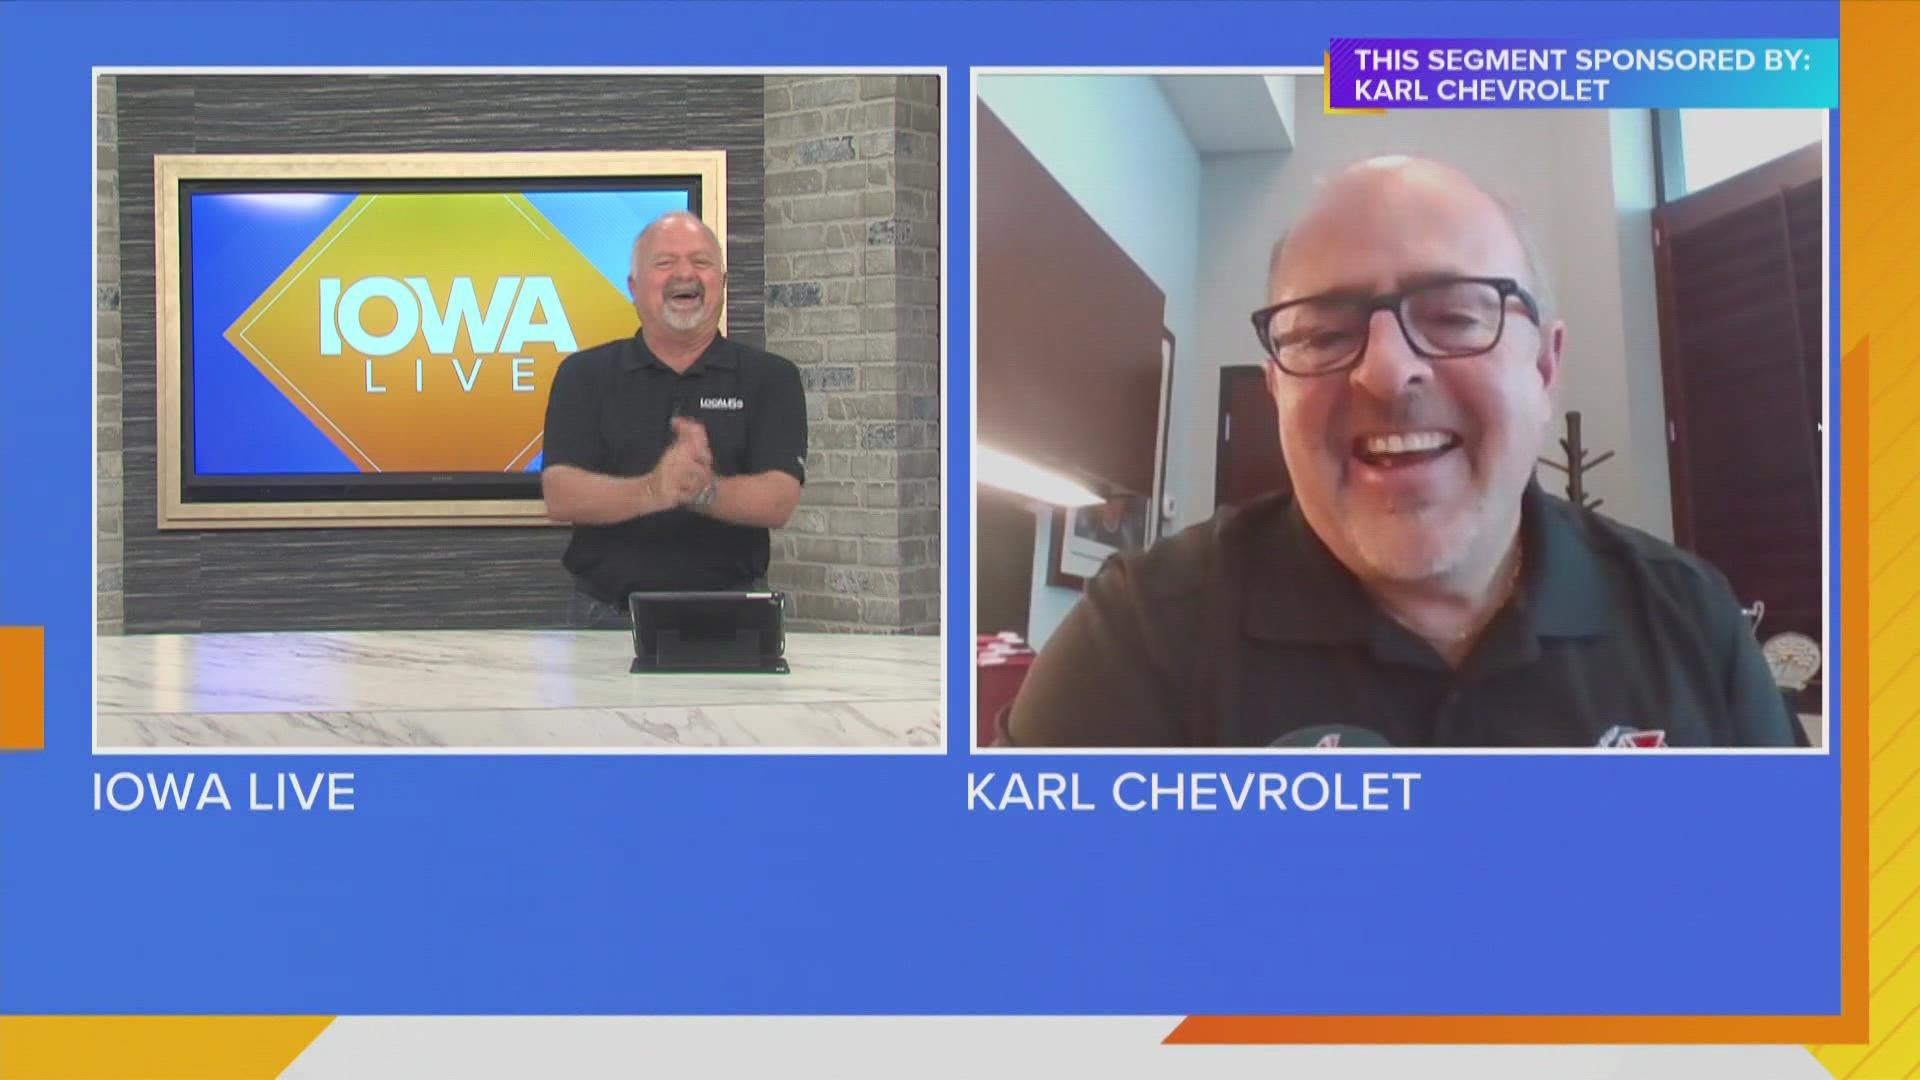 Bret Moyer is excited to talk about all the "ZERO" offers at the Karl Auto Group including Equinox & Ram Trucks! $500 Military Bonus Cash on Pre-owned | Paid Content